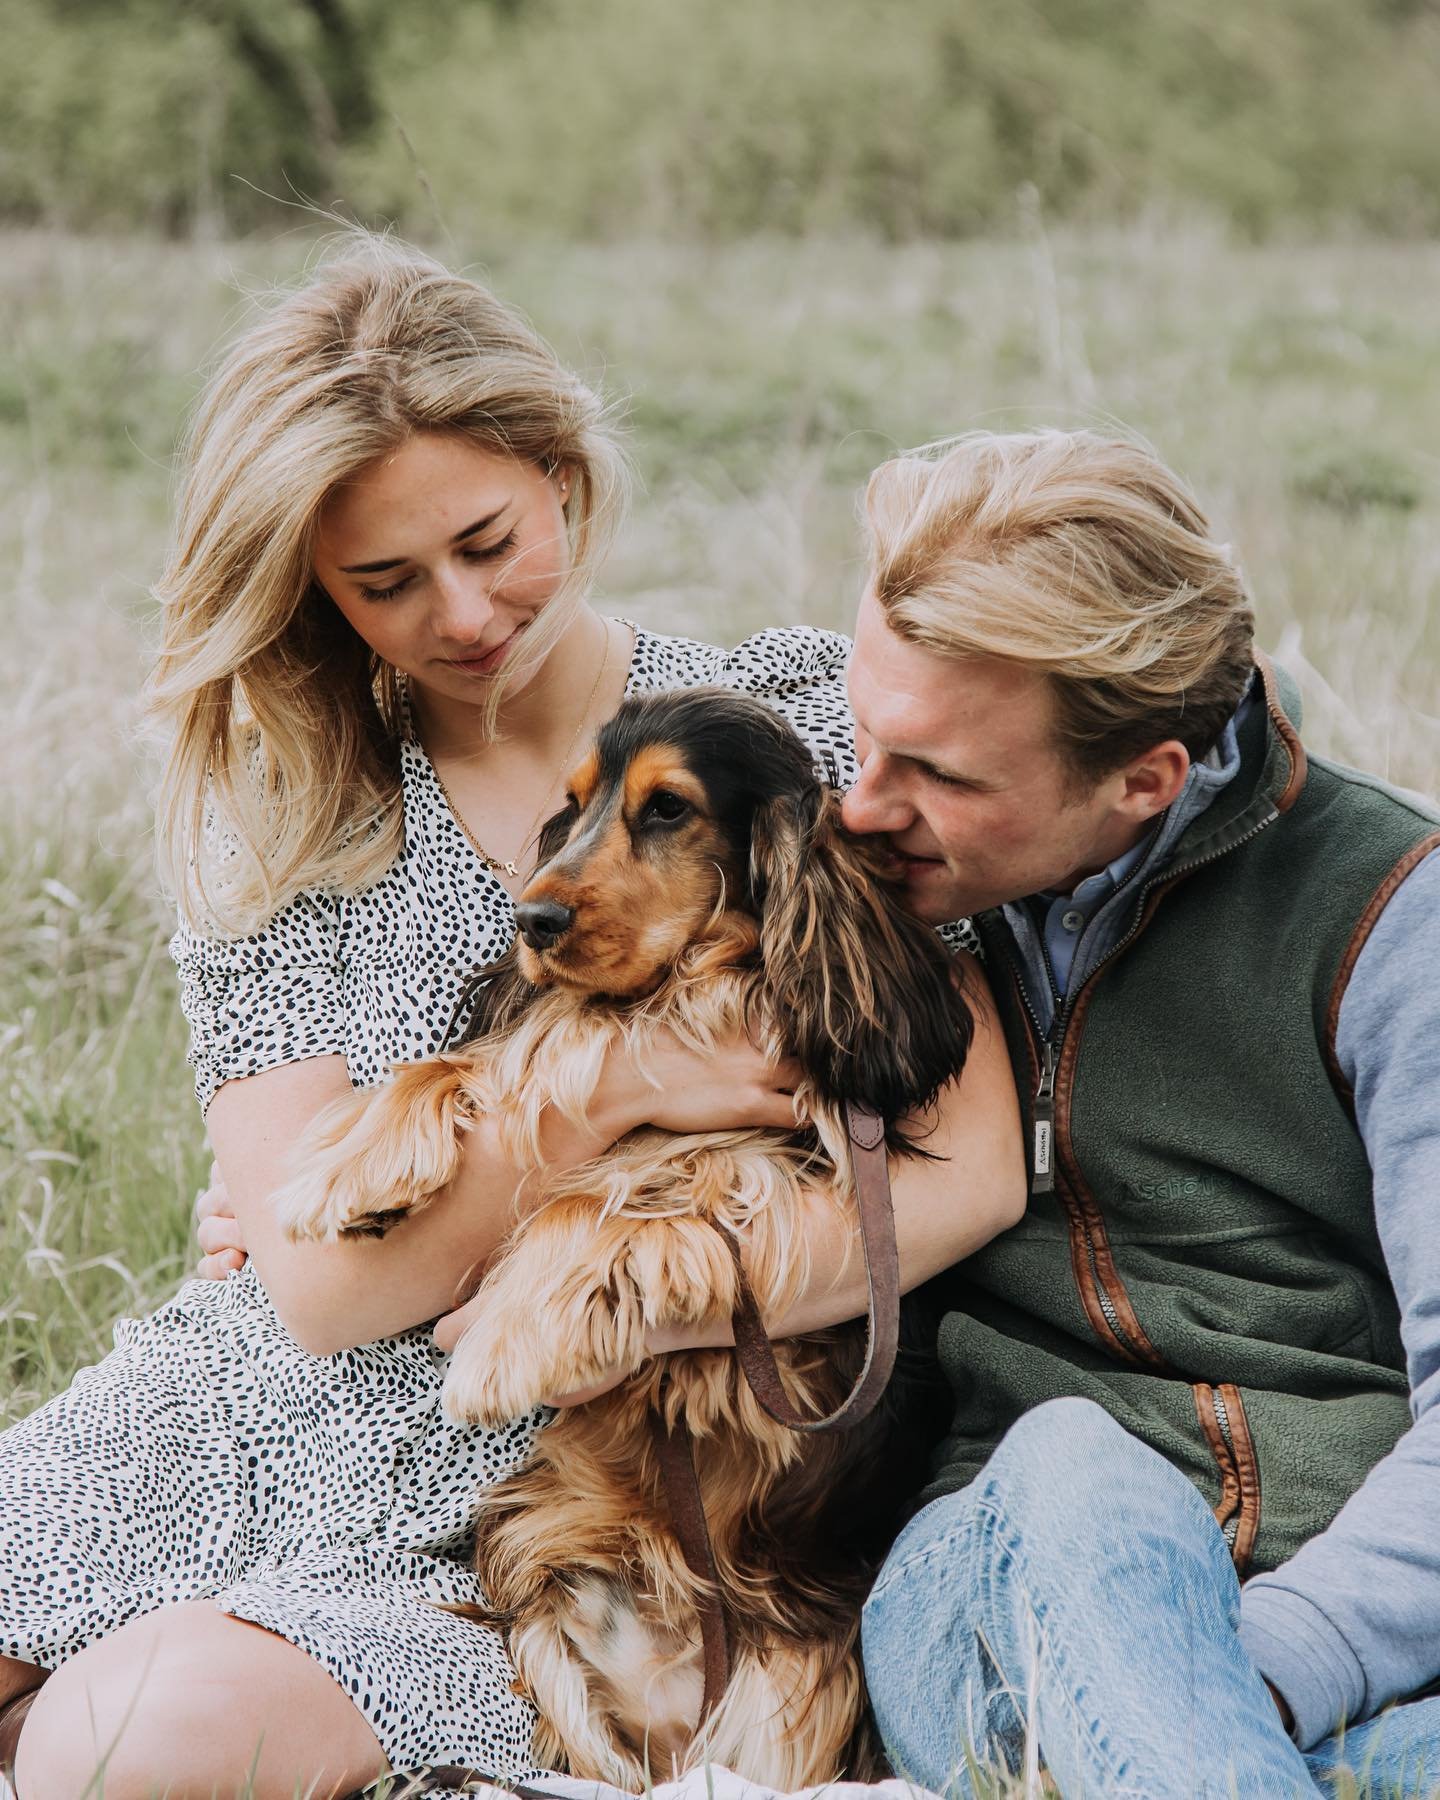 I have no words other than WOW 😍❤️ I am totally in love with these images and the love between them!

Do you want photos with your furry friend? Let&rsquo;s get you booked in! 

.
.
.
#dogphotography #familyphotography #essexphotographer #essexdogph